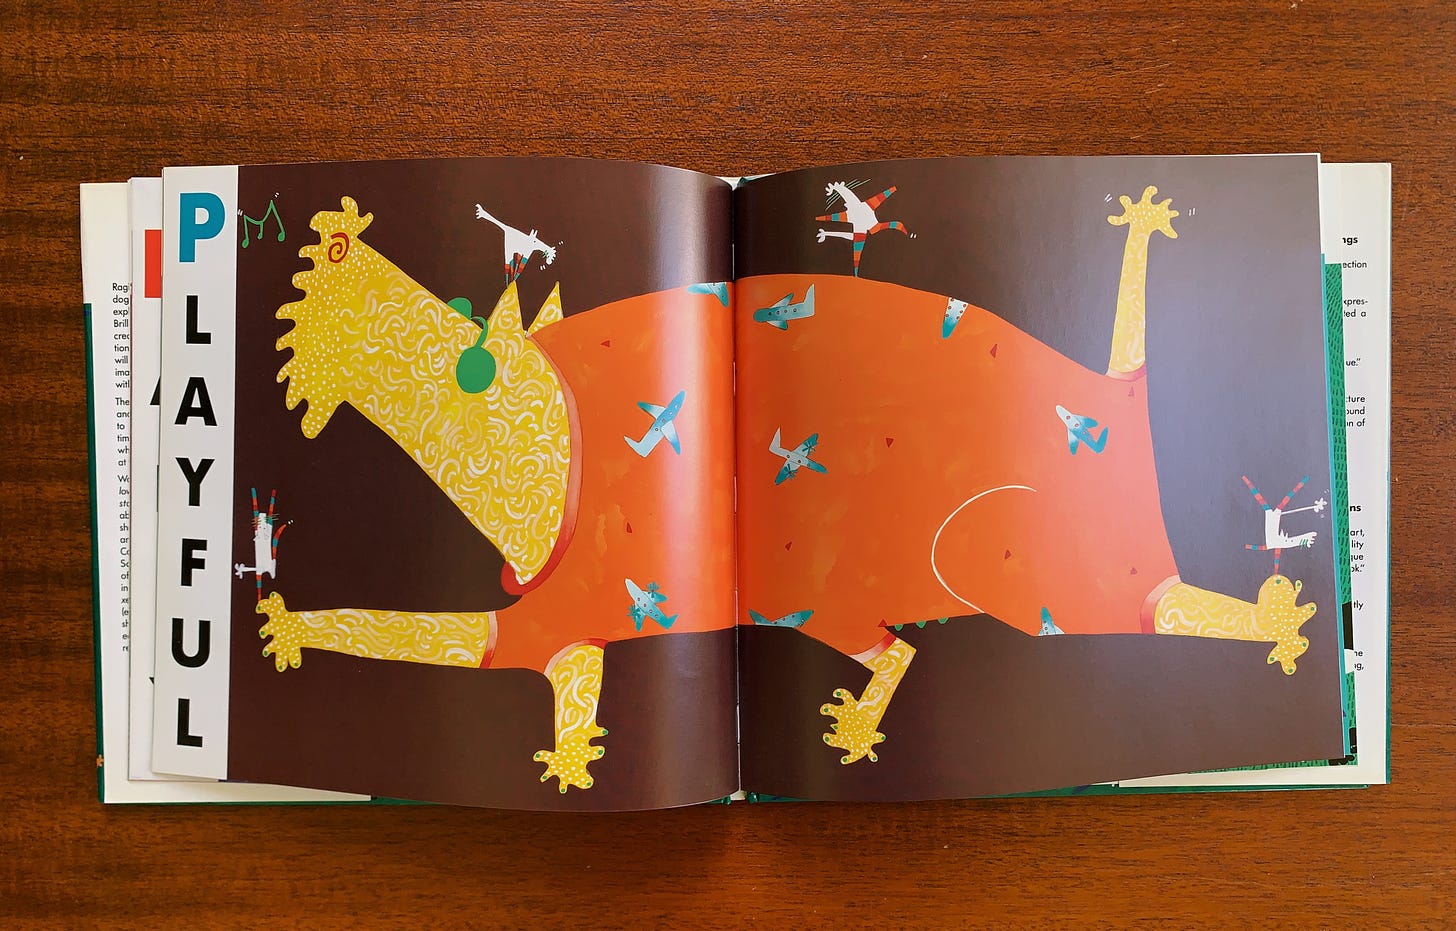 A spread of a made up animal in yellow with the word "PLAYFUL" from the book "C is for Curious"